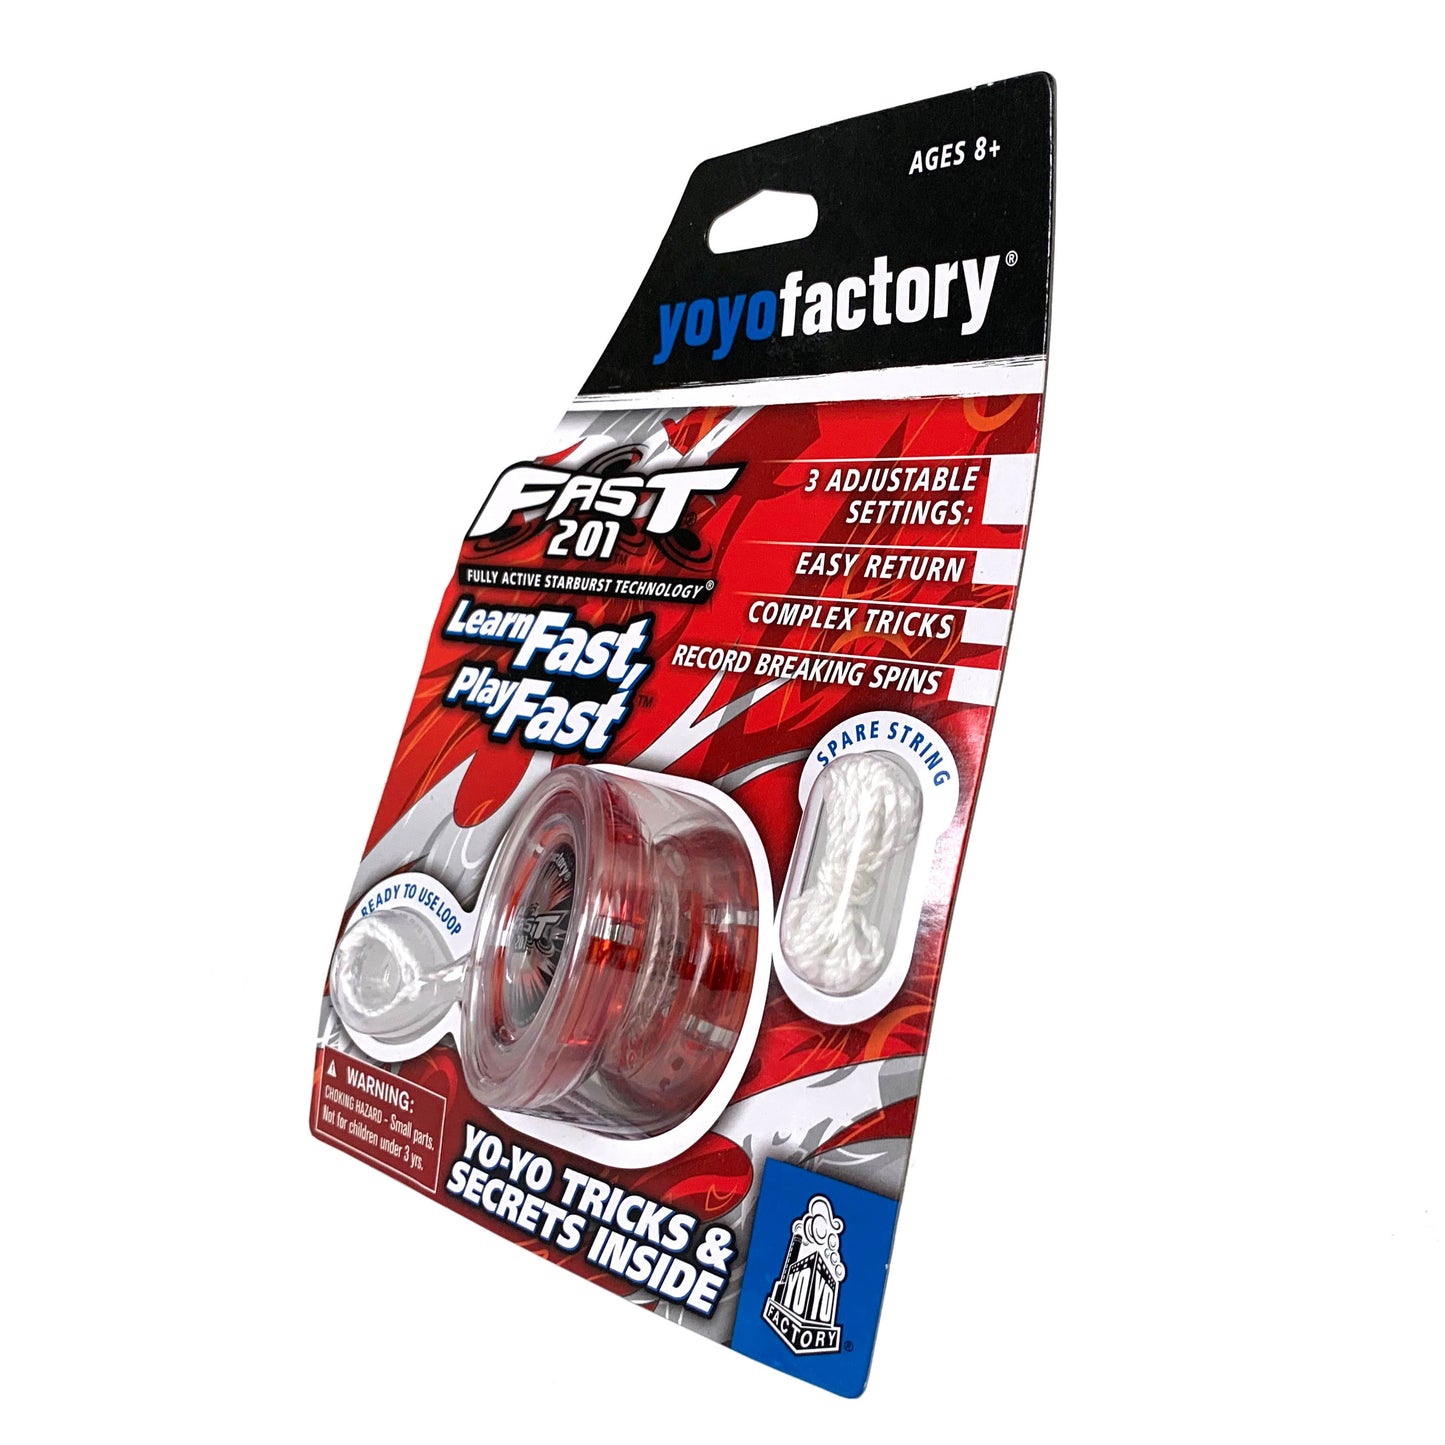 fast 201 yoyo red boxed